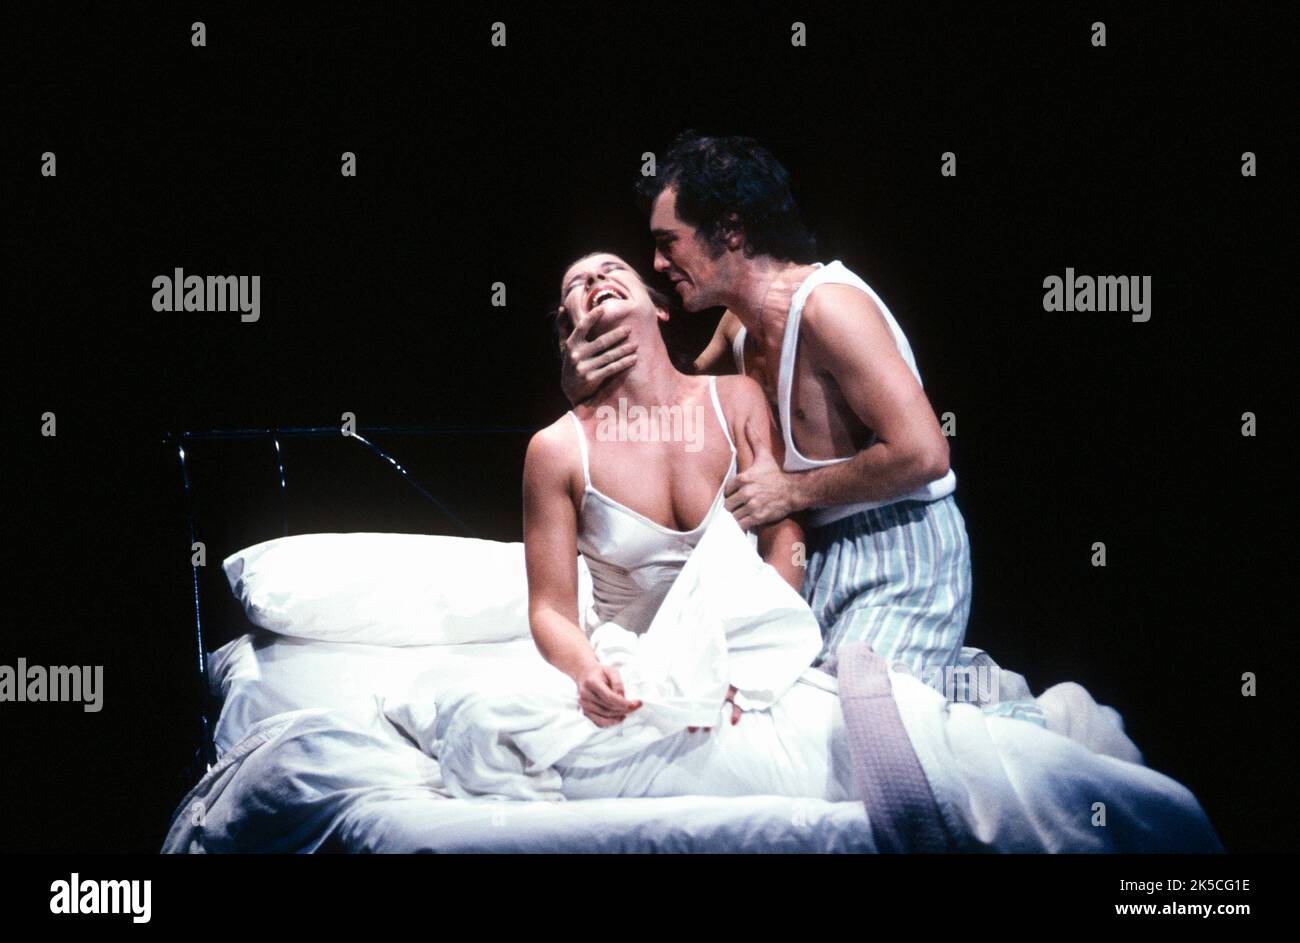 Clare Higgins (Gertrude), Mark Rylance (Hamlet) in HAMLET by Shakespeare at the Royal Shakespeare Company (RSC), Barbican Theatre, London EC2  23/11/1989  music: Claire van Kampen  design: Antony McDonald  lighting: Thomas Webster  fights: Alexis Denisof  director: Ron Daniels Stock Photo